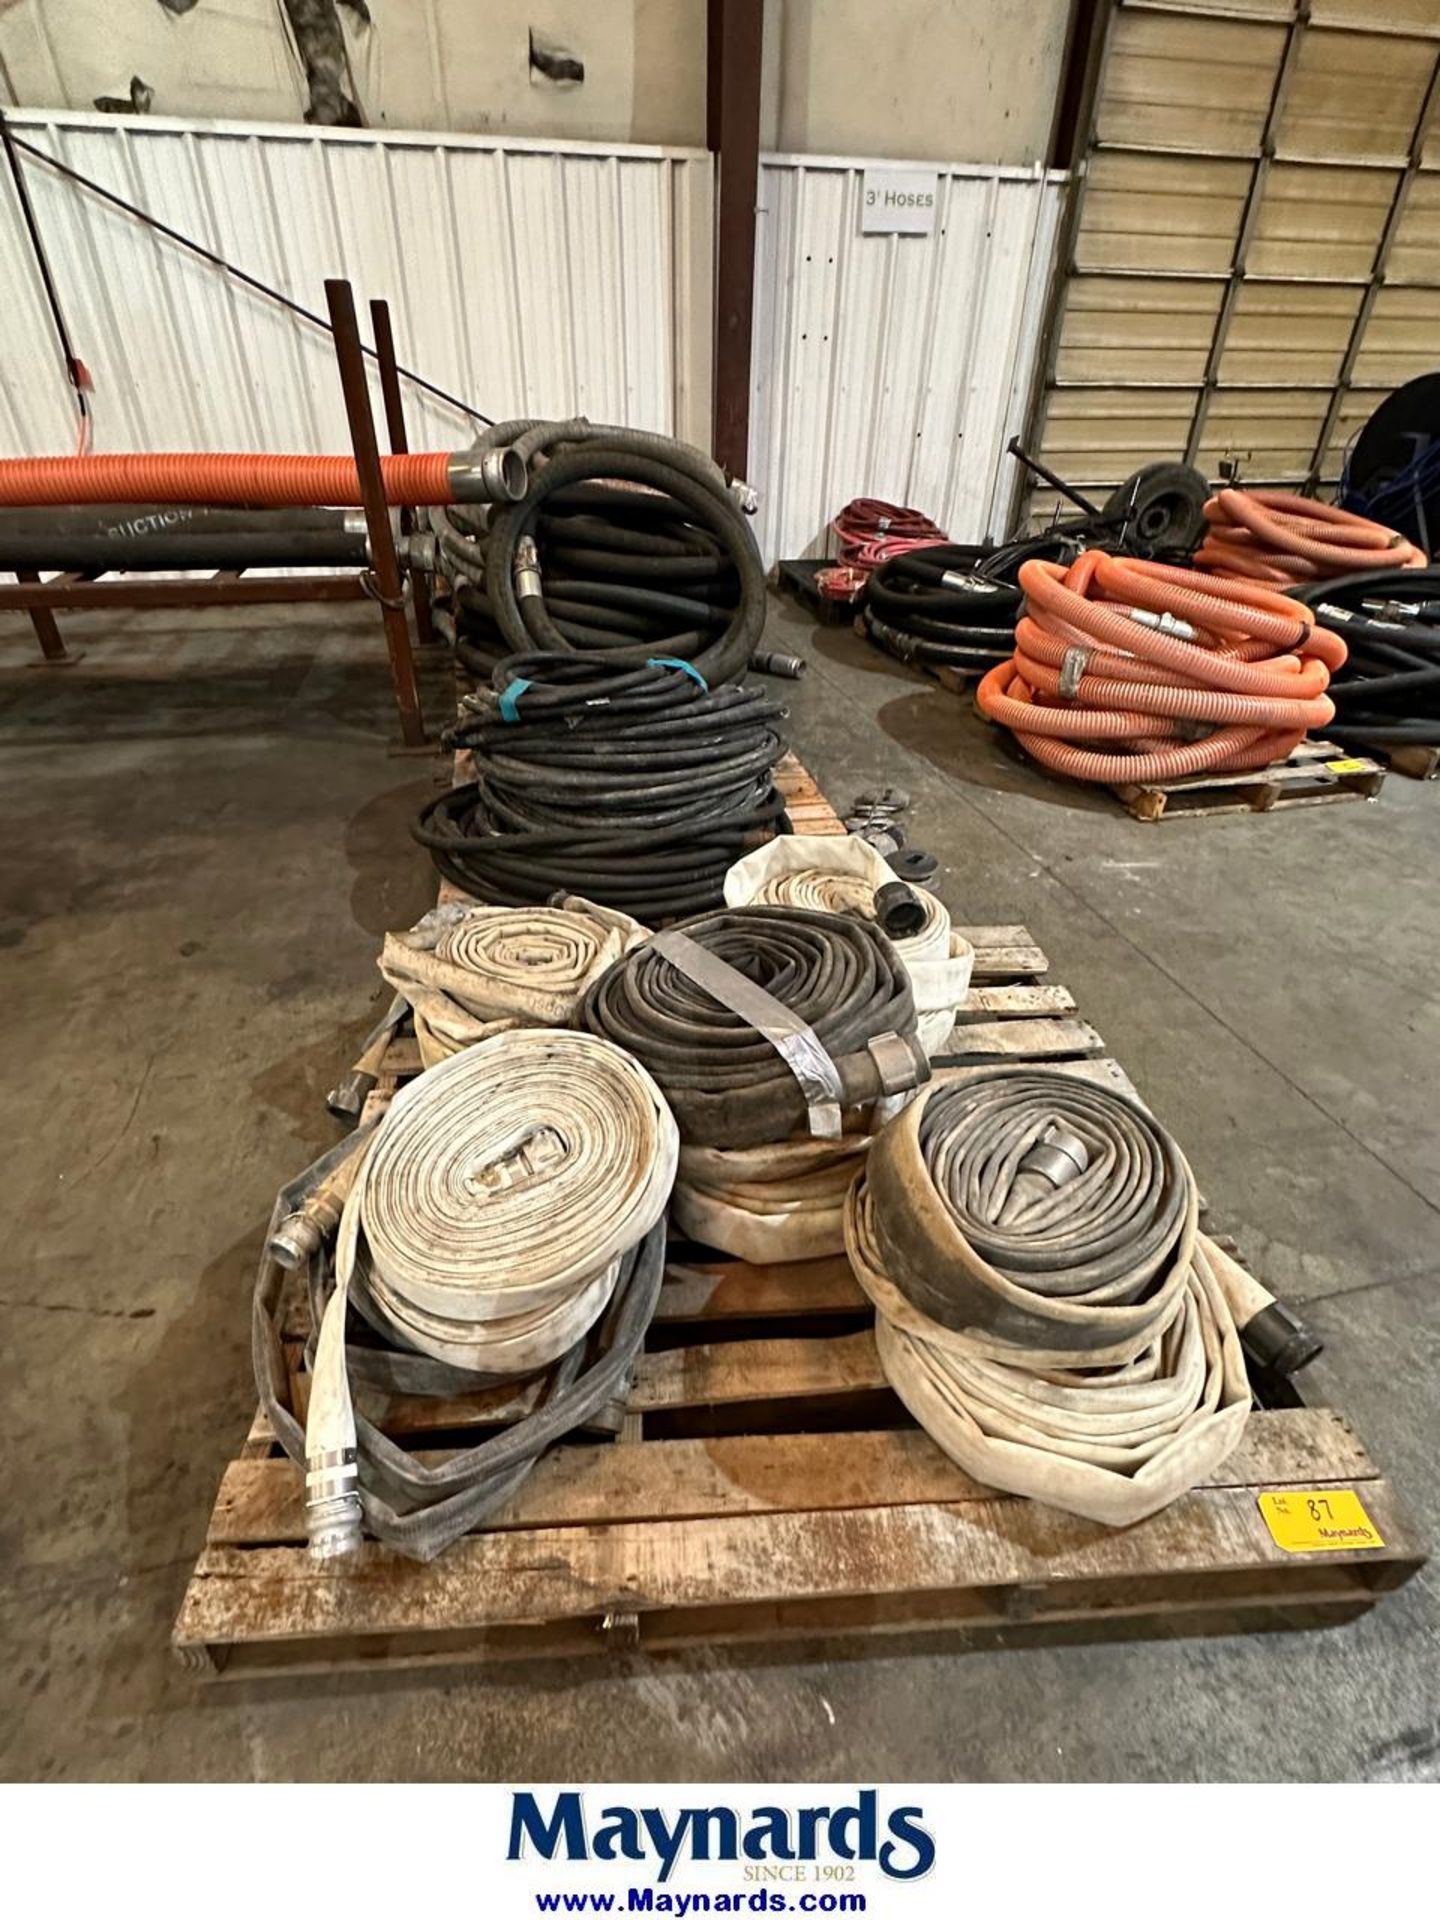 Lot of Hoses and Rack - Image 2 of 6